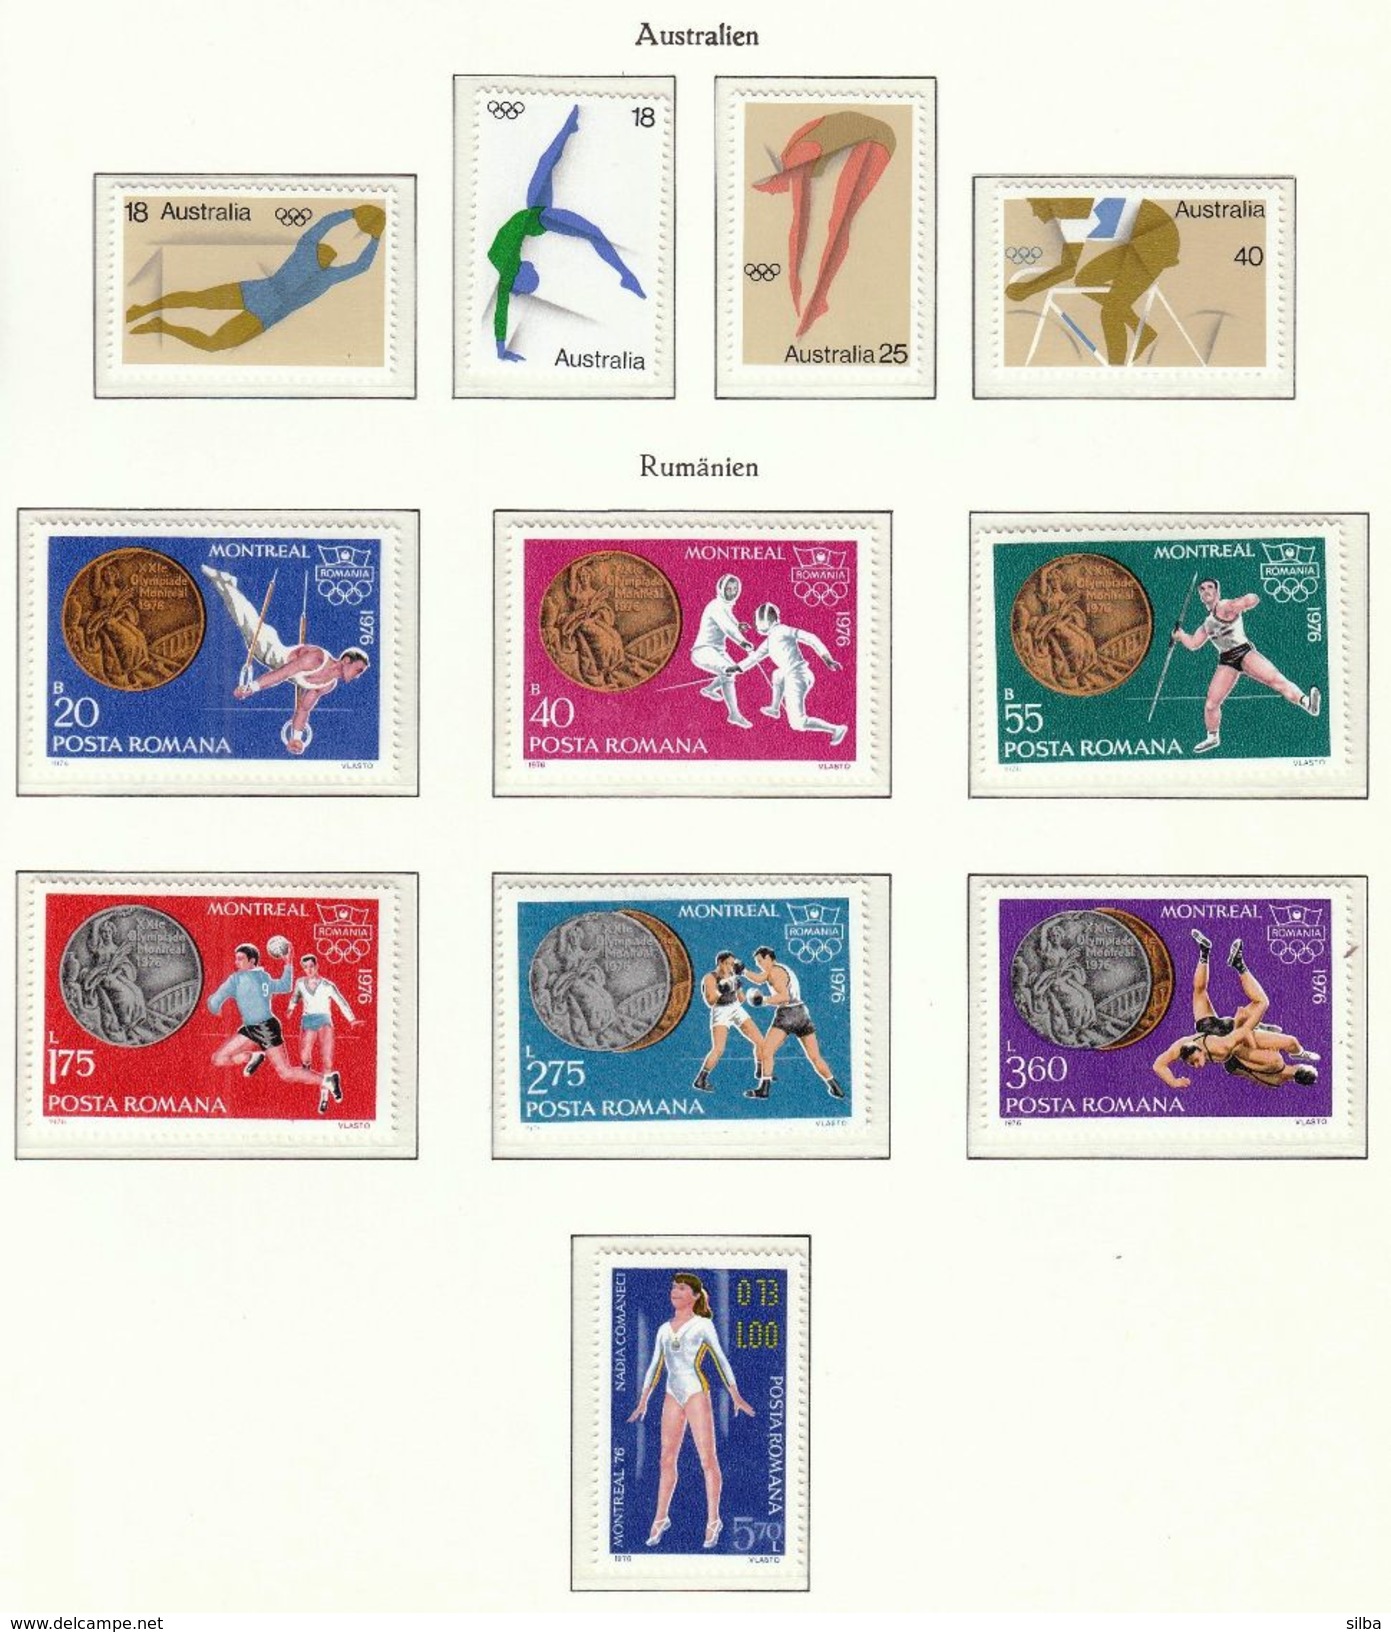 Australia, Romania / Olympic Games Montreal 1976 / Football, Gymnastics, Diving, Cycling, Fencing, Athletics, Boxing - Ete 1976: Montréal